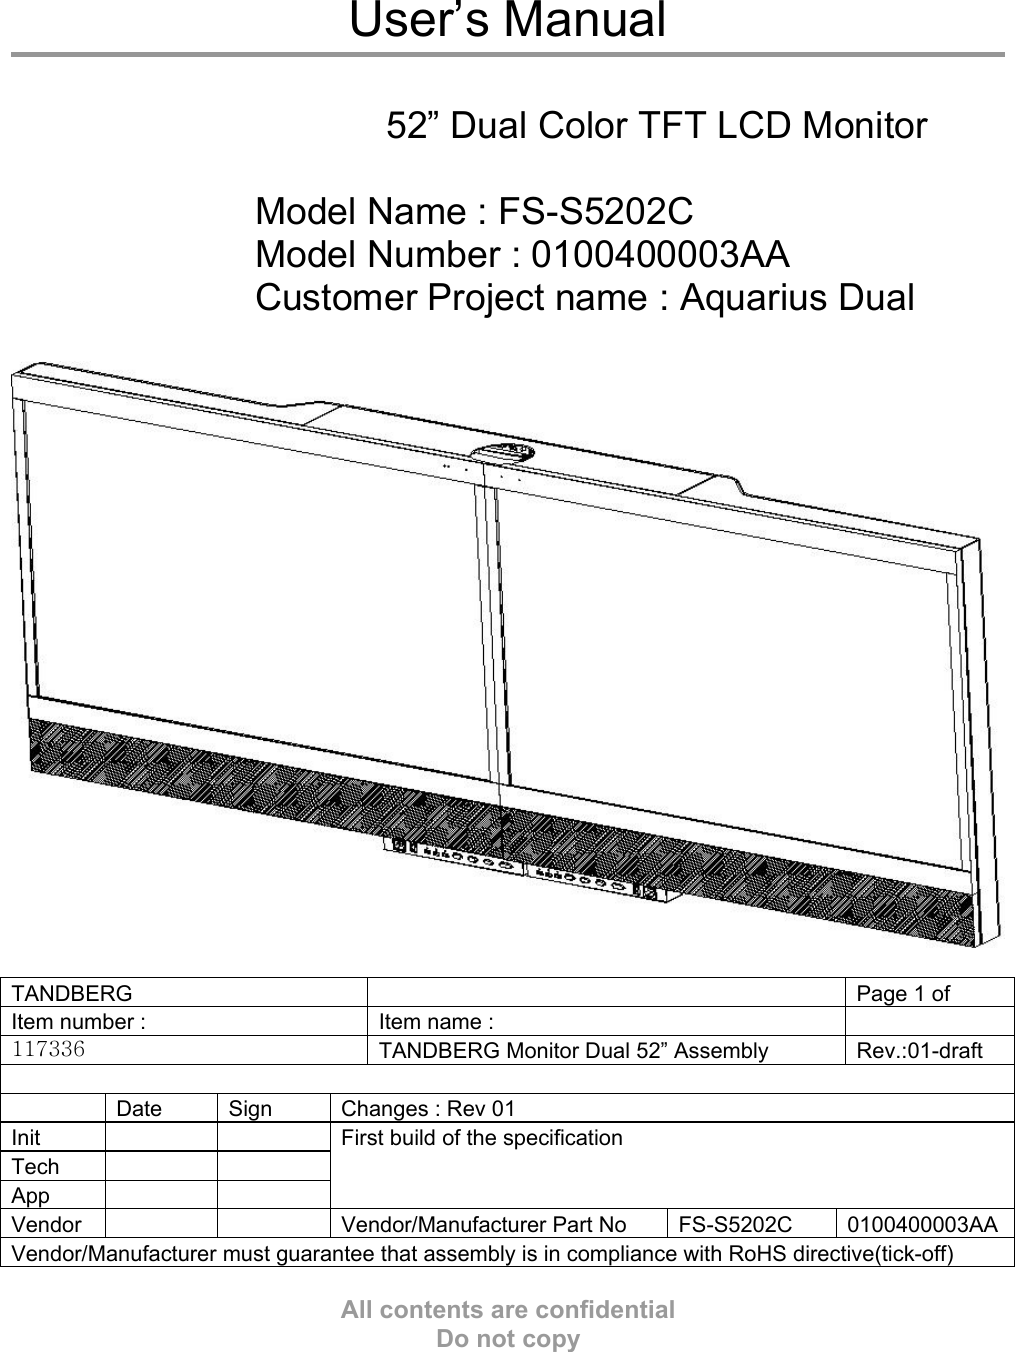  User’s Manual   52” Dual Color TFT LCD Monitor  Model Name : FS-S5202C Model Number : 0100400003AA Customer Project name : Aquarius Dual    TANDBERG    Page 1 of   Item number :    Item name :     117336  TANDBERG Monitor Dual 52” Assembly  Rev.:01-draft    Date  Sign  Changes : Rev 01 Init    Tech    App    First build of the specification Vendor   Vendor/Manufacturer Part No FS-S5202C 0100400003AAVendor/Manufacturer must guarantee that assembly is in compliance with RoHS directive(tick-off)  All contents are confidential Do not copy 